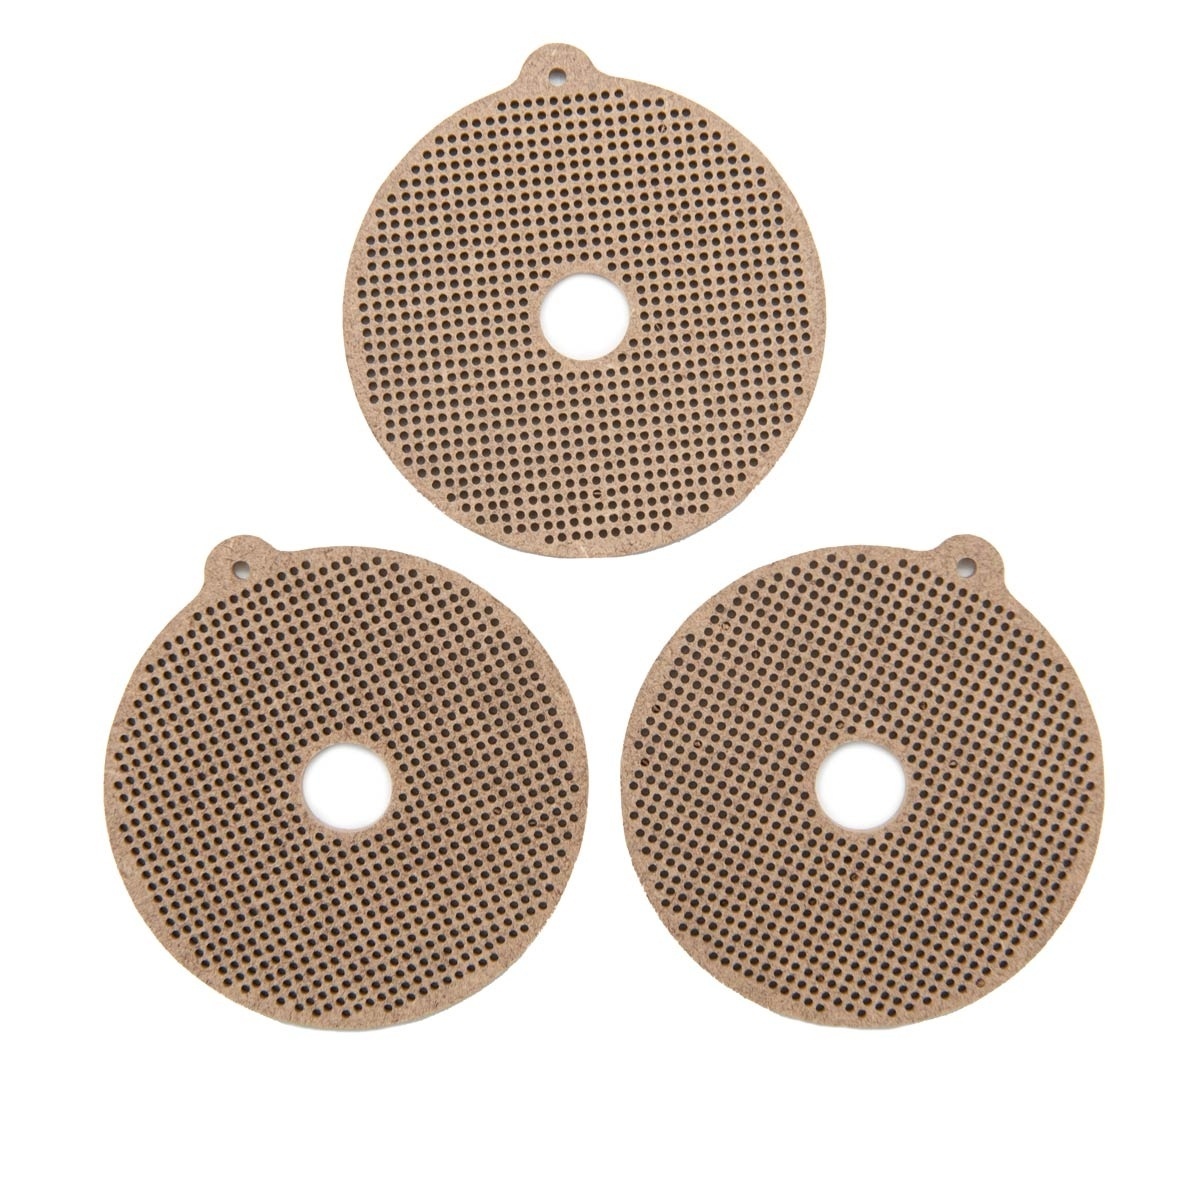 Donut Perforated Canvas Set фото 1